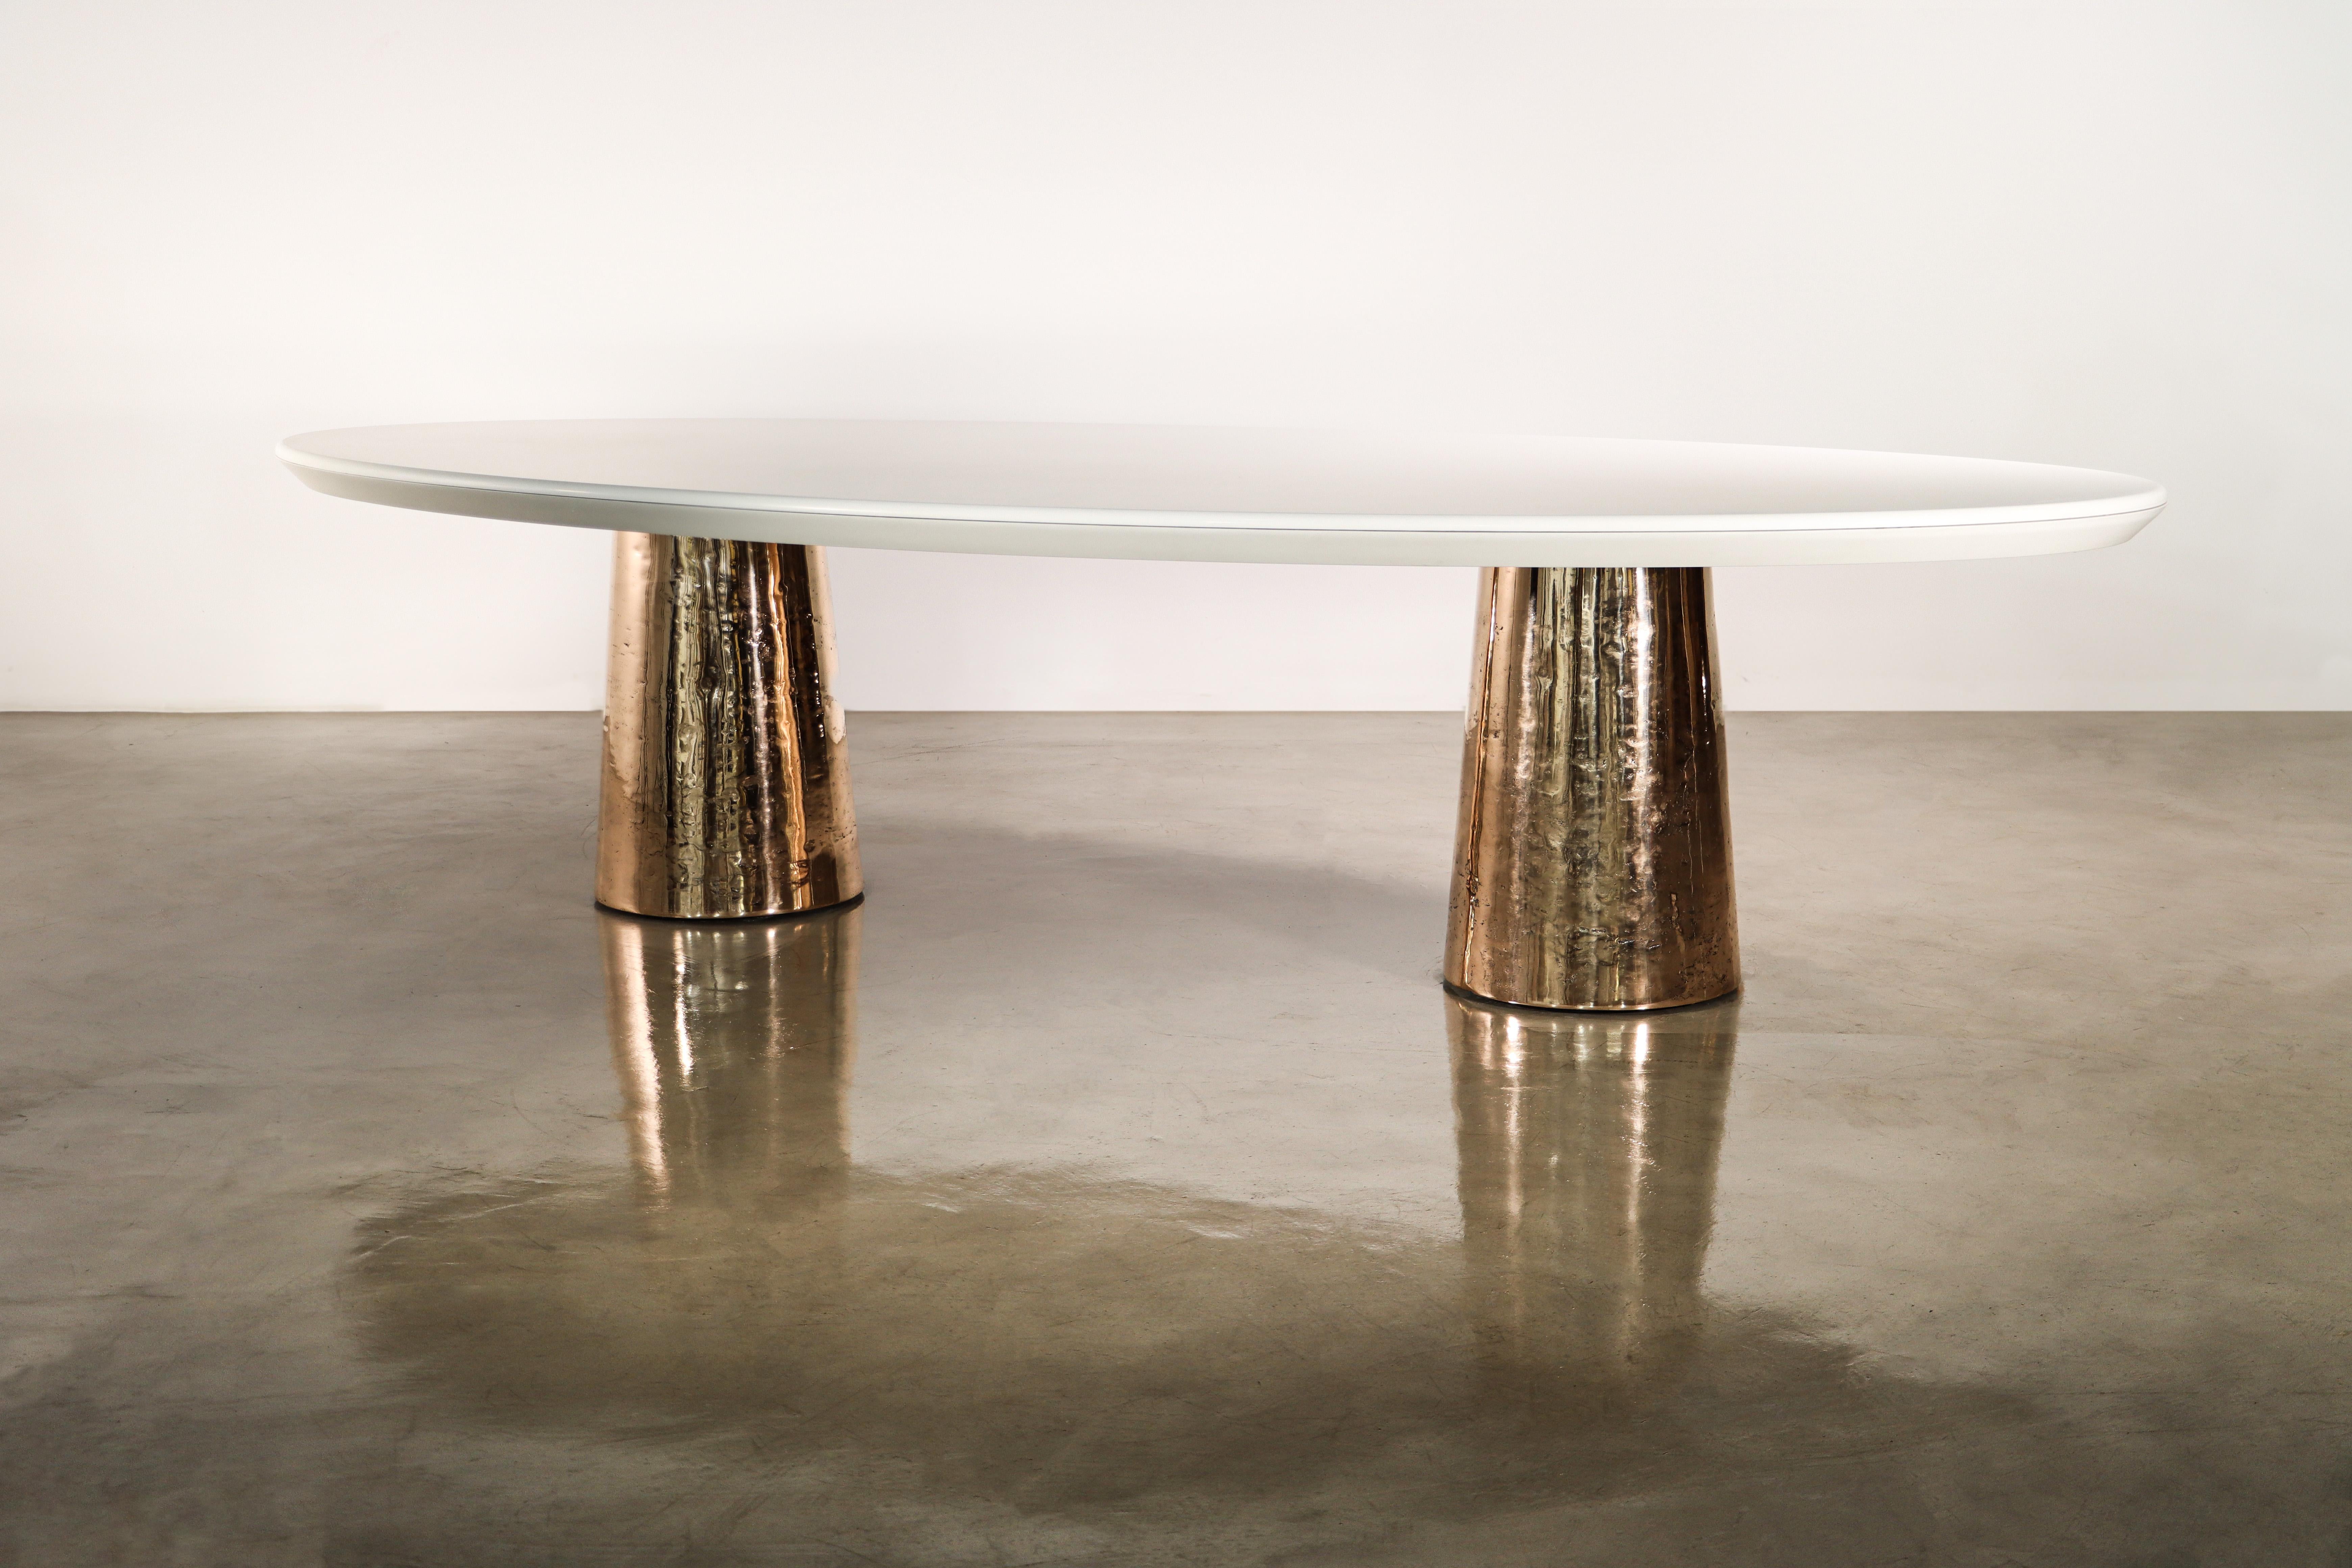 Benone cast bronze stone & wood twin pedestal oval dining table from Costantini

Measurements are 132